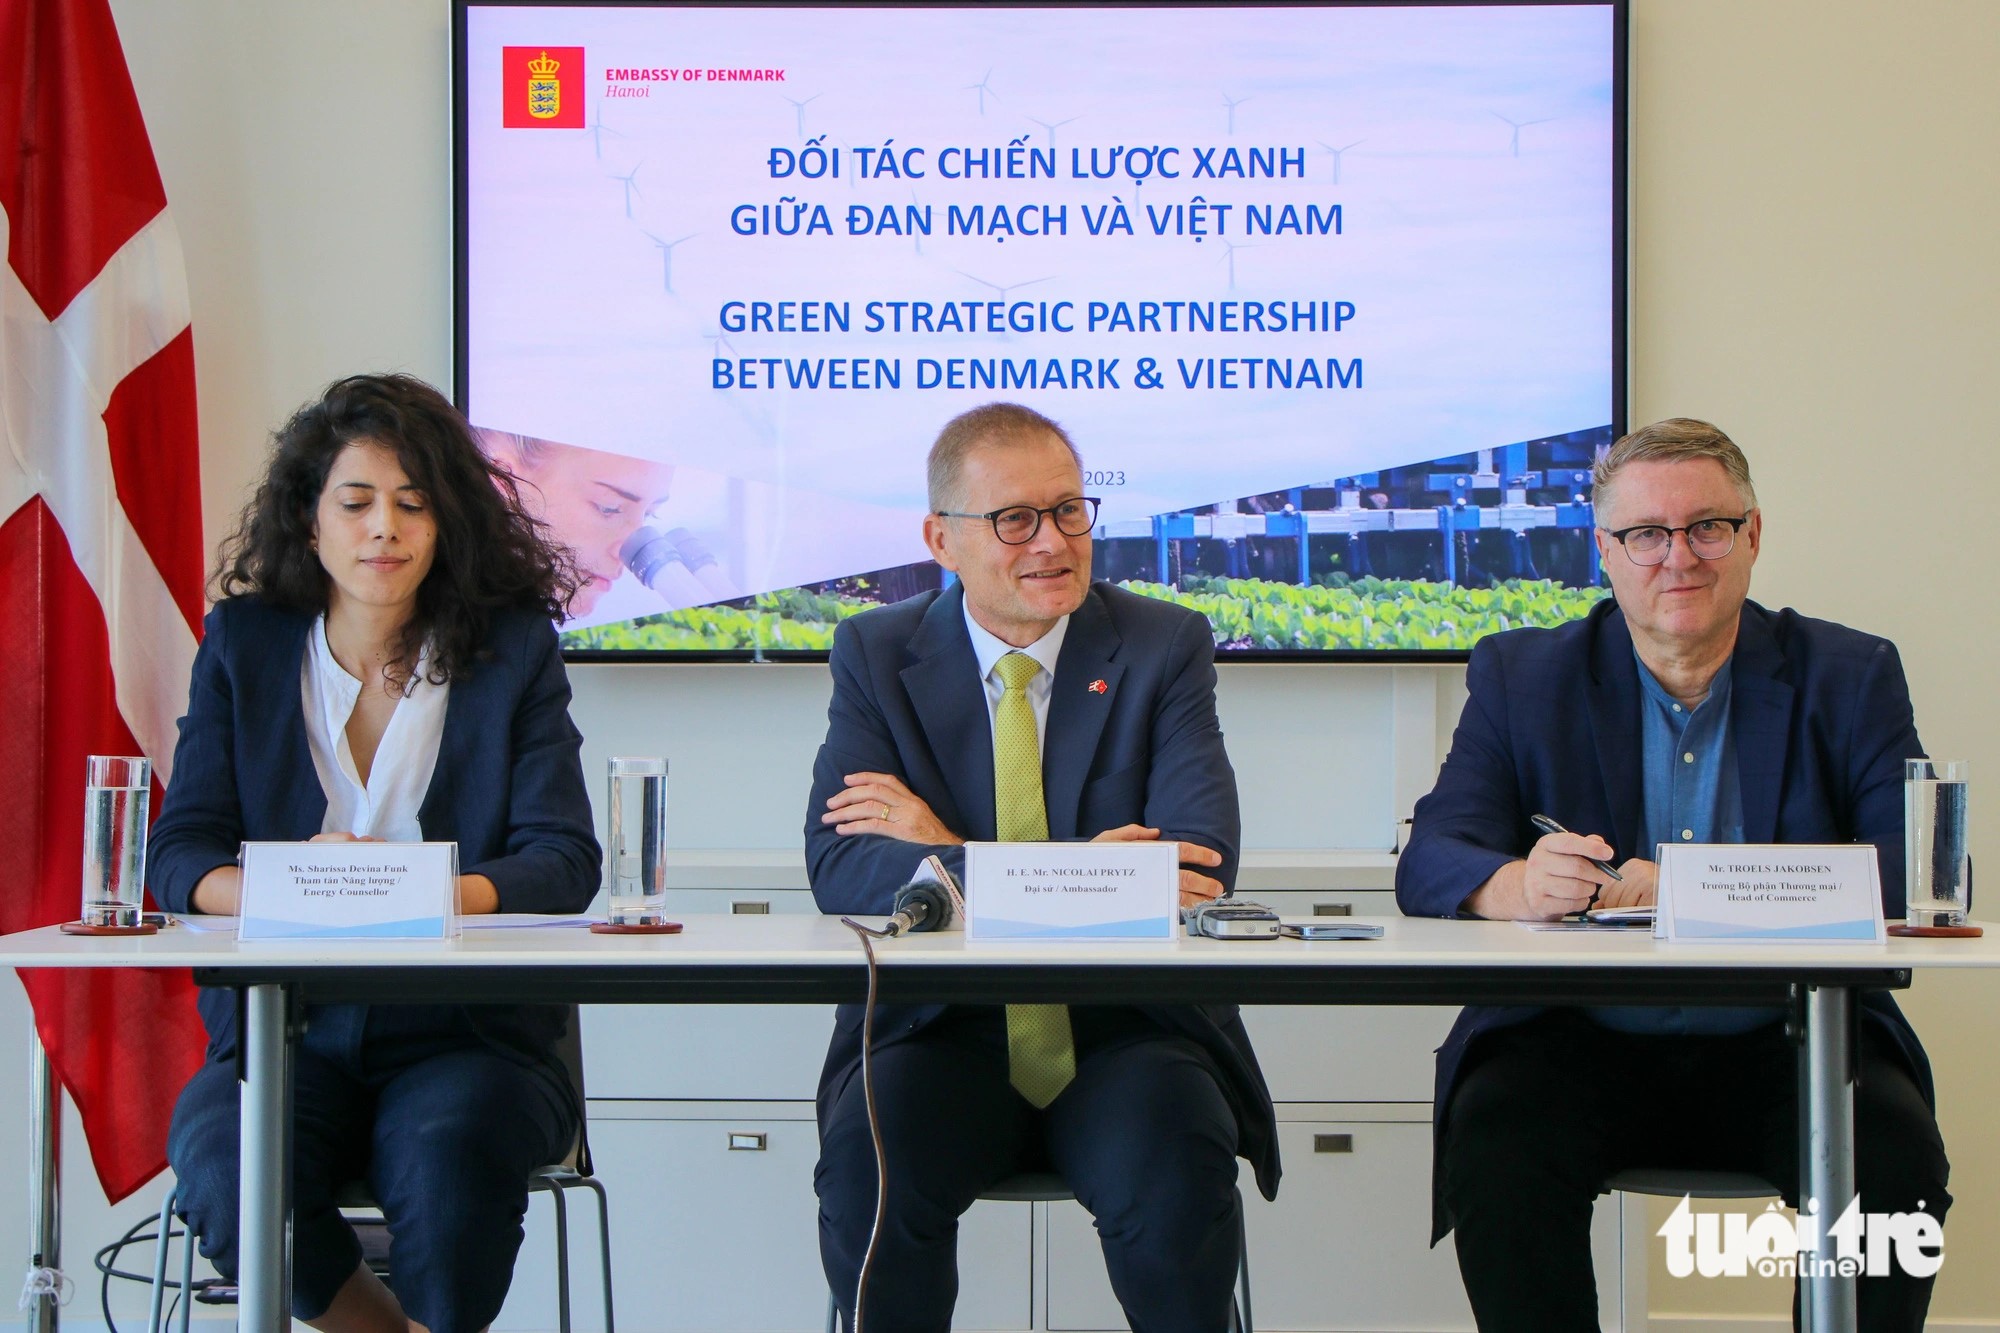 Ambassador Nicolai Prytz (center) and officials in charge of the economy and energy at the Danish Embassy in Hanoi discuss the Green Strategic Partnership. Photo: Duy Linh / Tuoi Tre